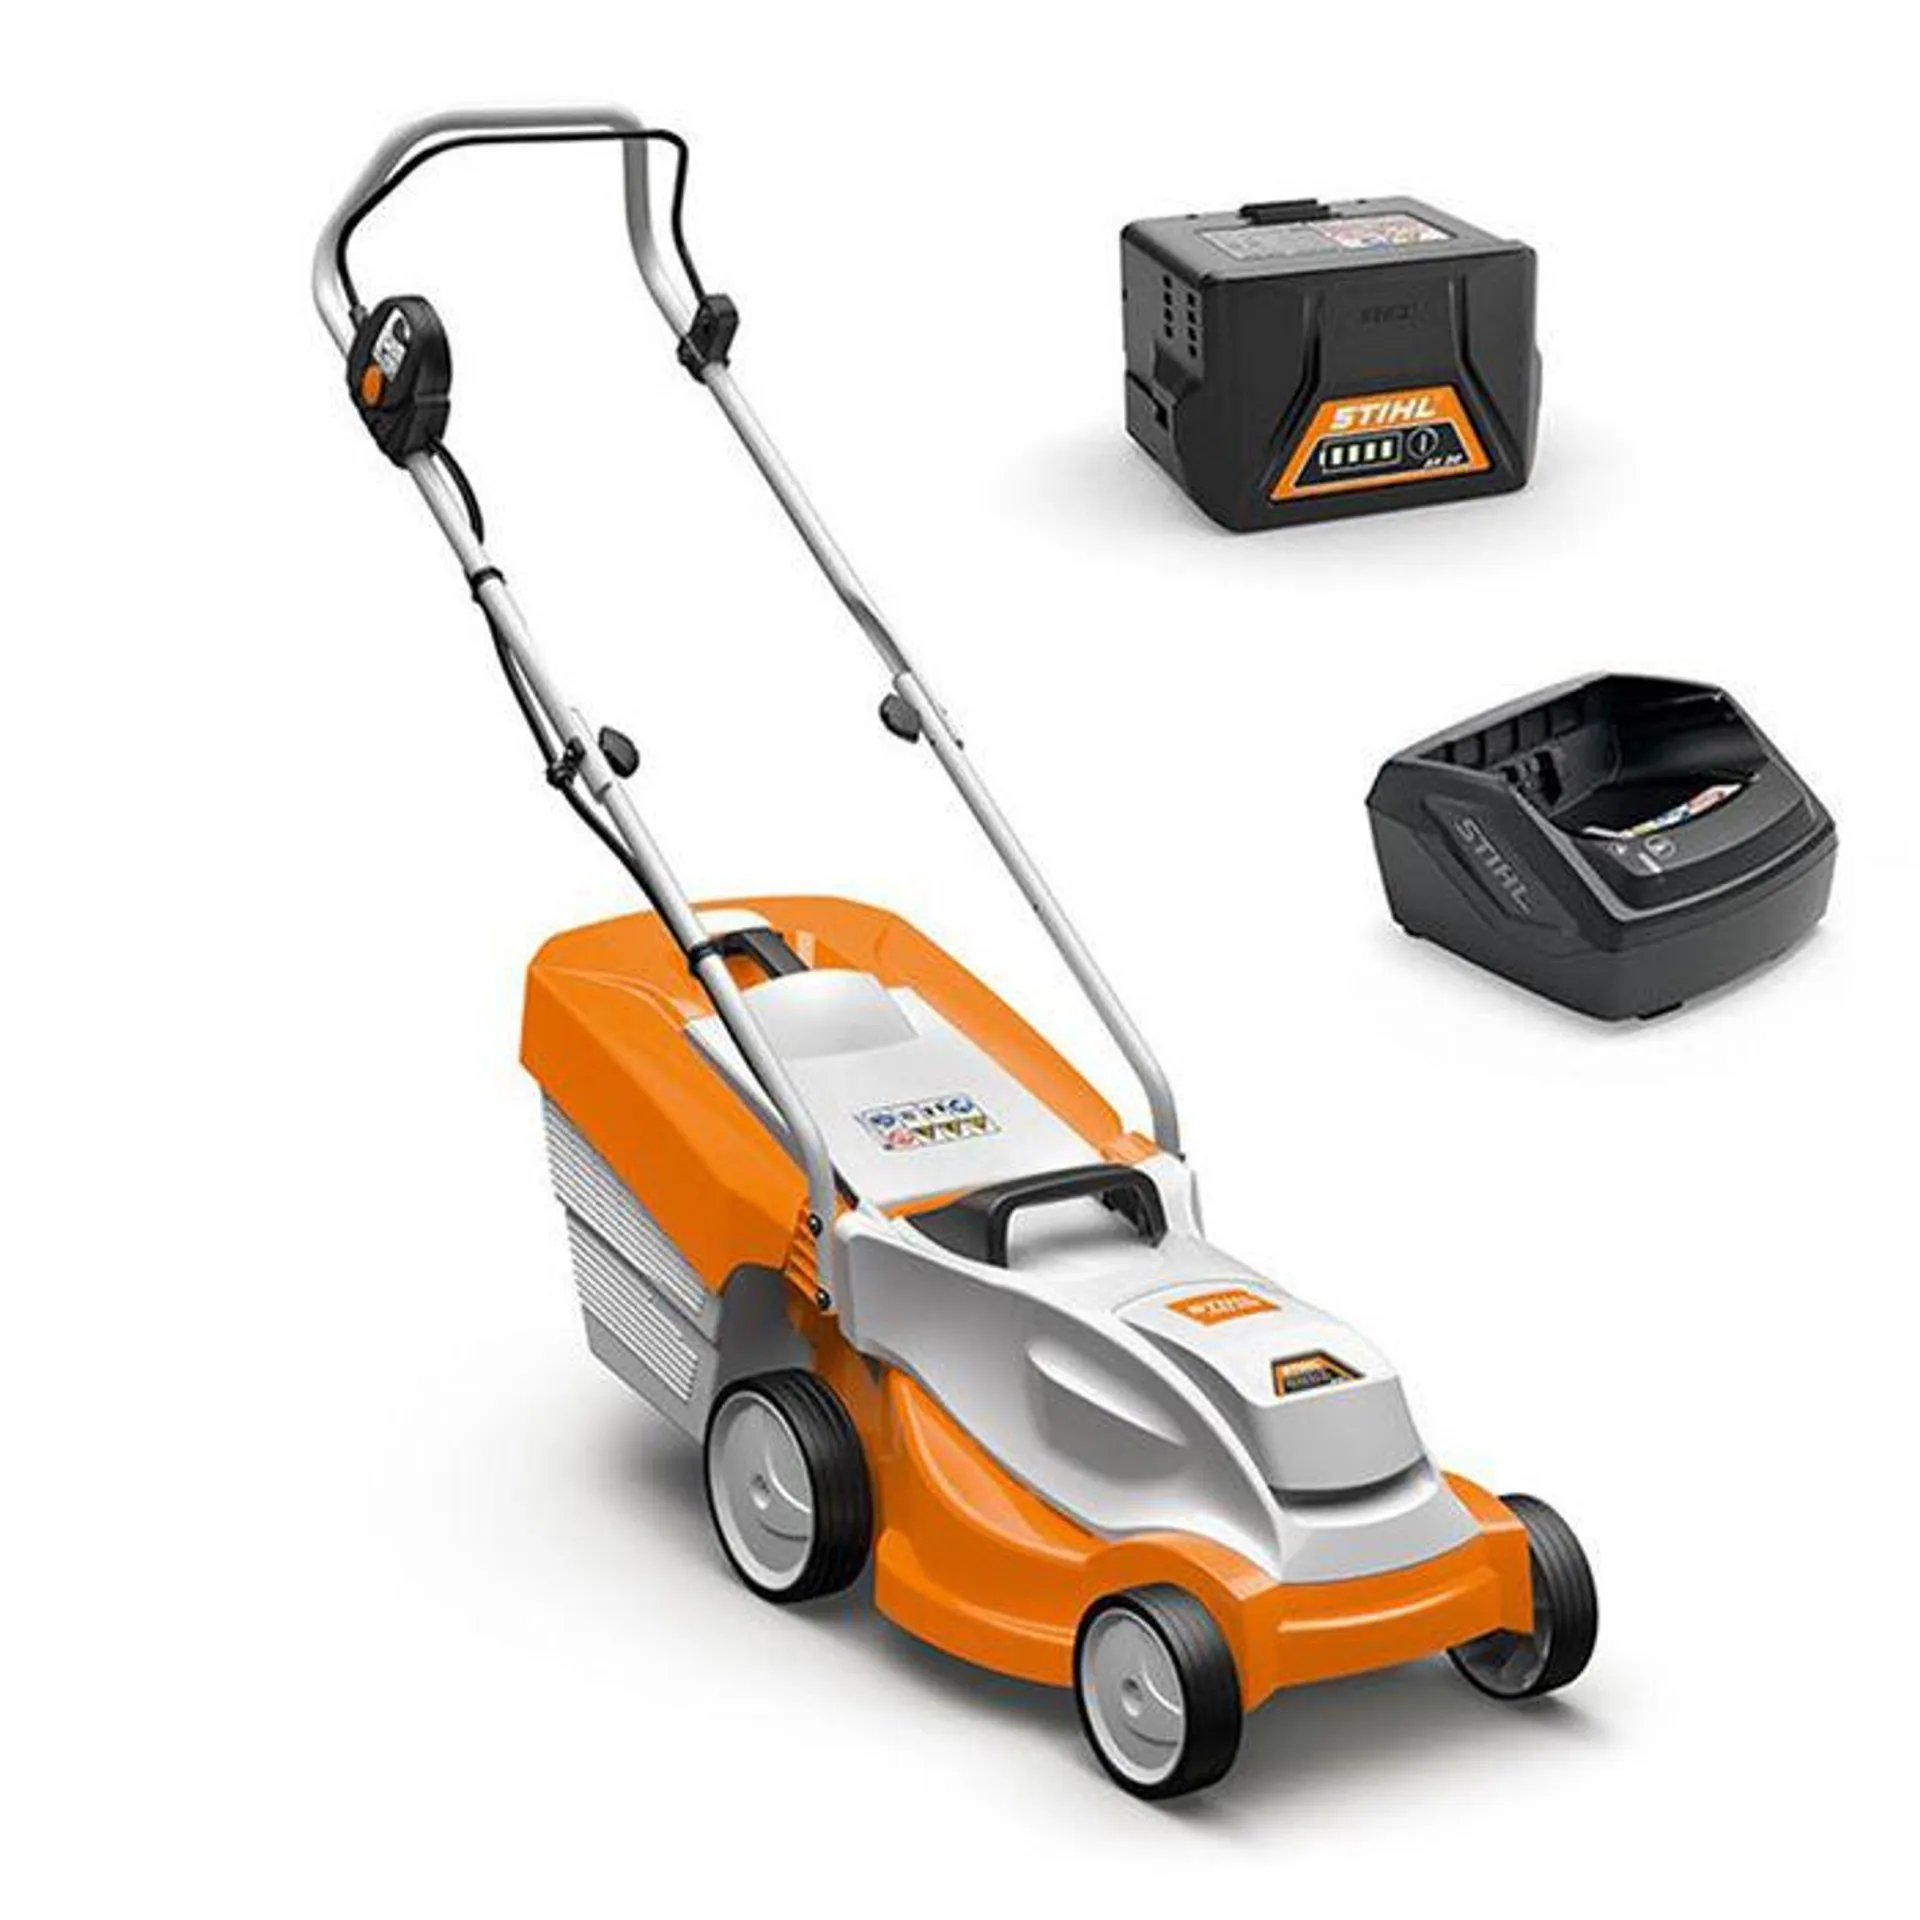 STIHL RMA 235 Battery Lawnmower Kit (With Battery & Charger)